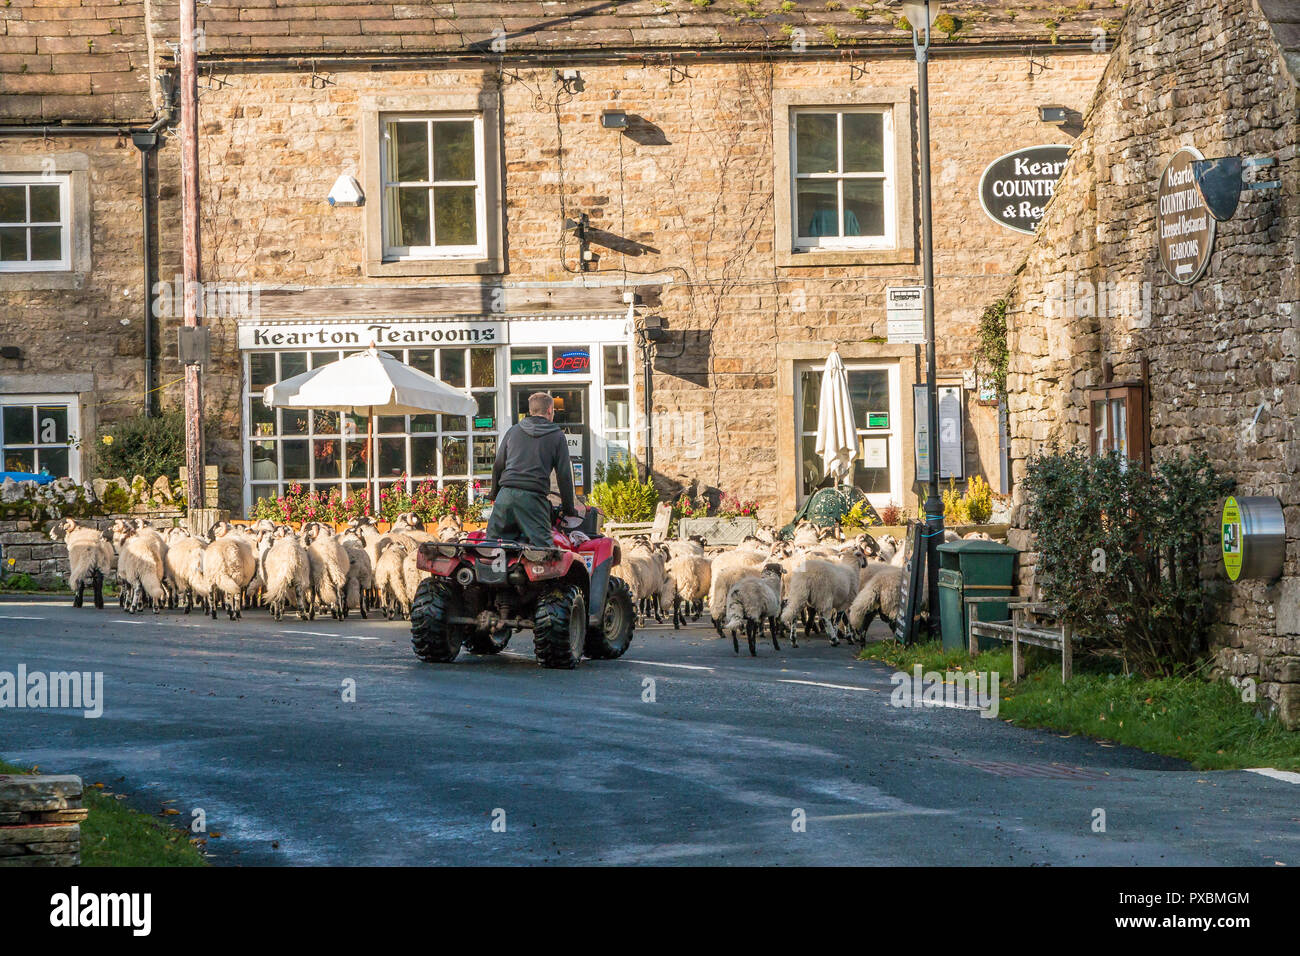 A farmer on a quad bike escorts a flock of sheep through the rural village of Thwaite, Swaledale, Yorkshire Dales, UK Stock Photo